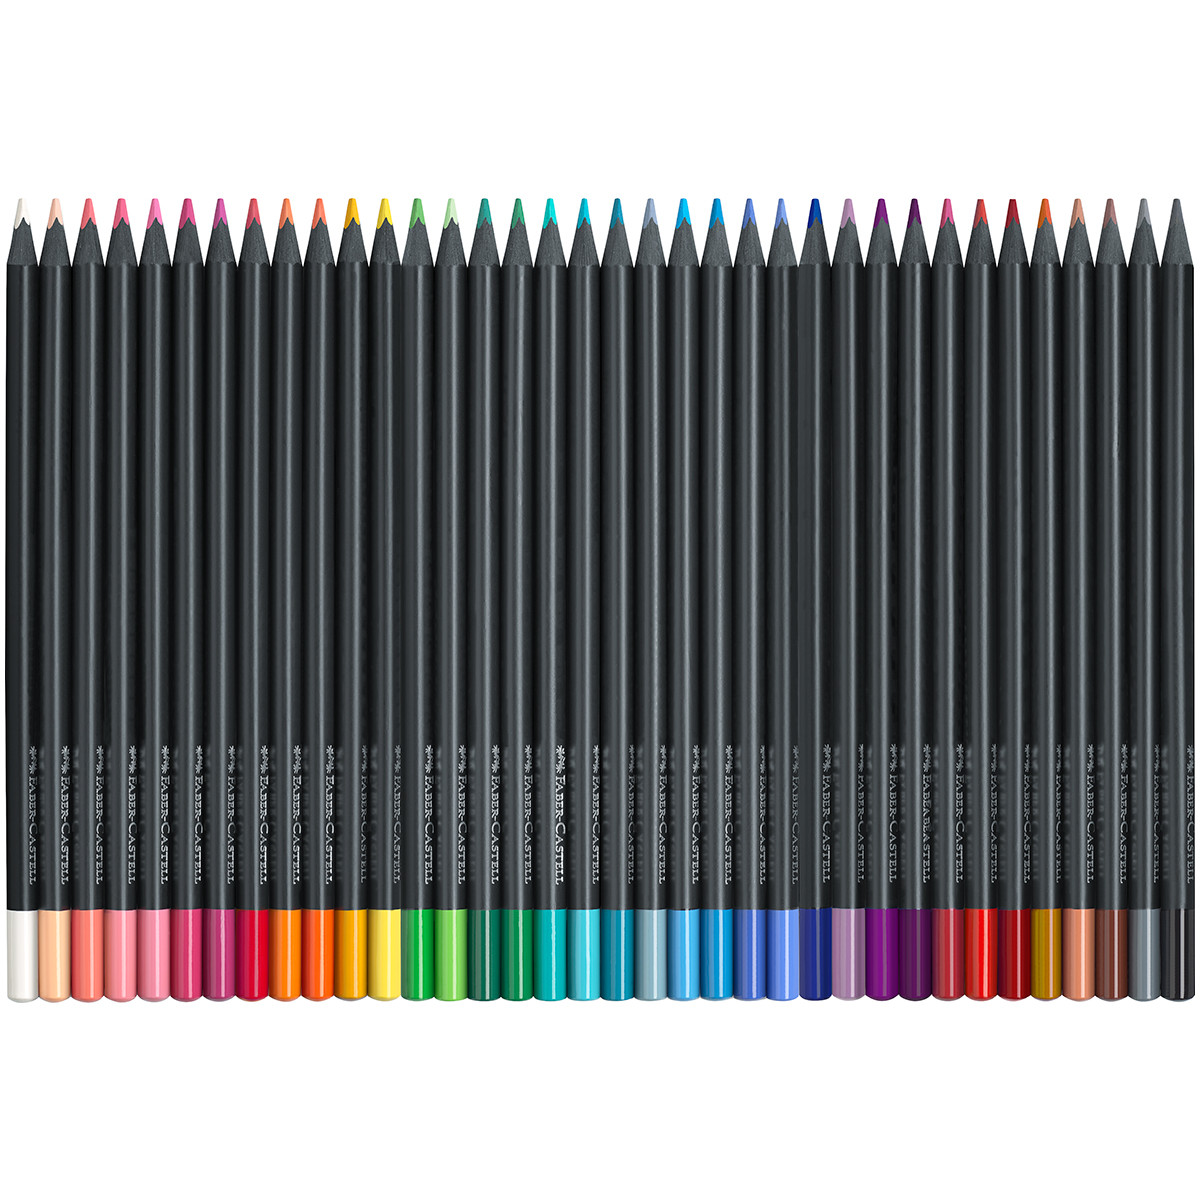  Faber-Castell Black Edition 116490 Colouring Pencils, 100  Metal Case, Shatterproof, for Children and Adults : Office Products